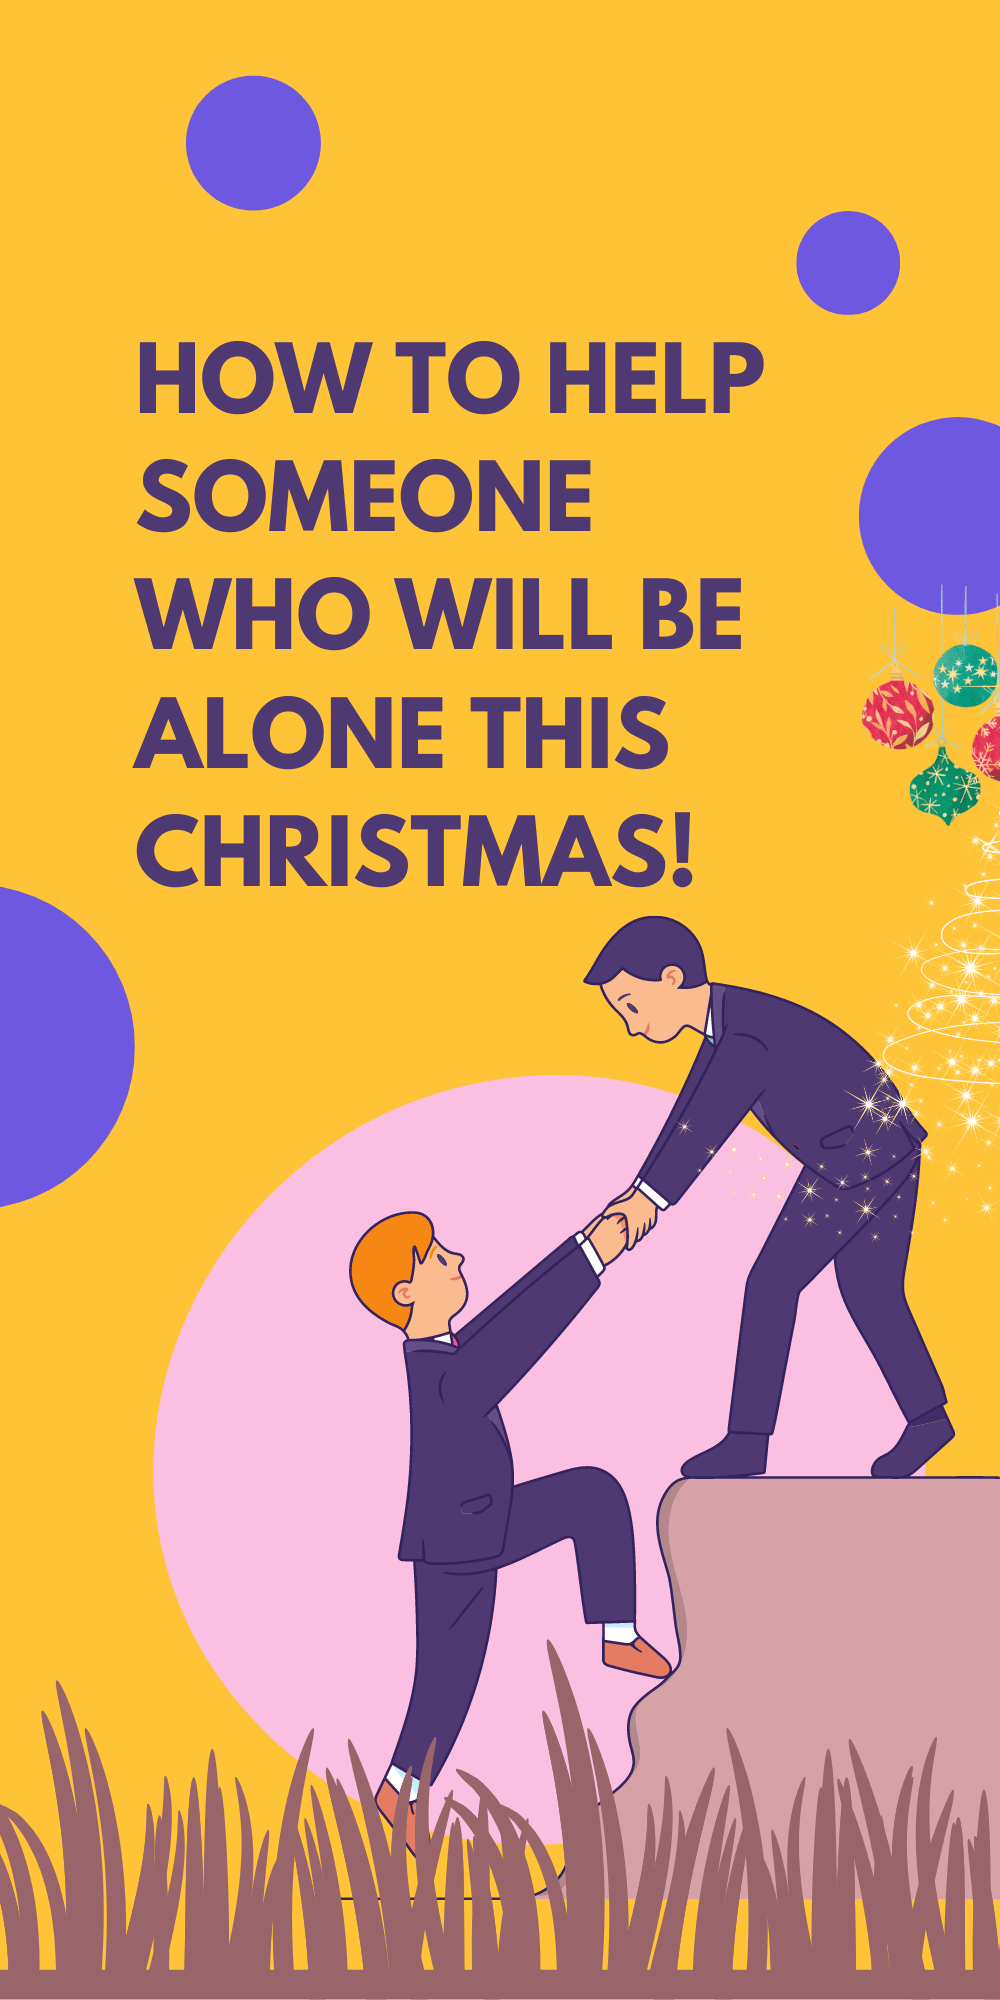 How To Help Someone Who Will Be Spending Christmas Alone!